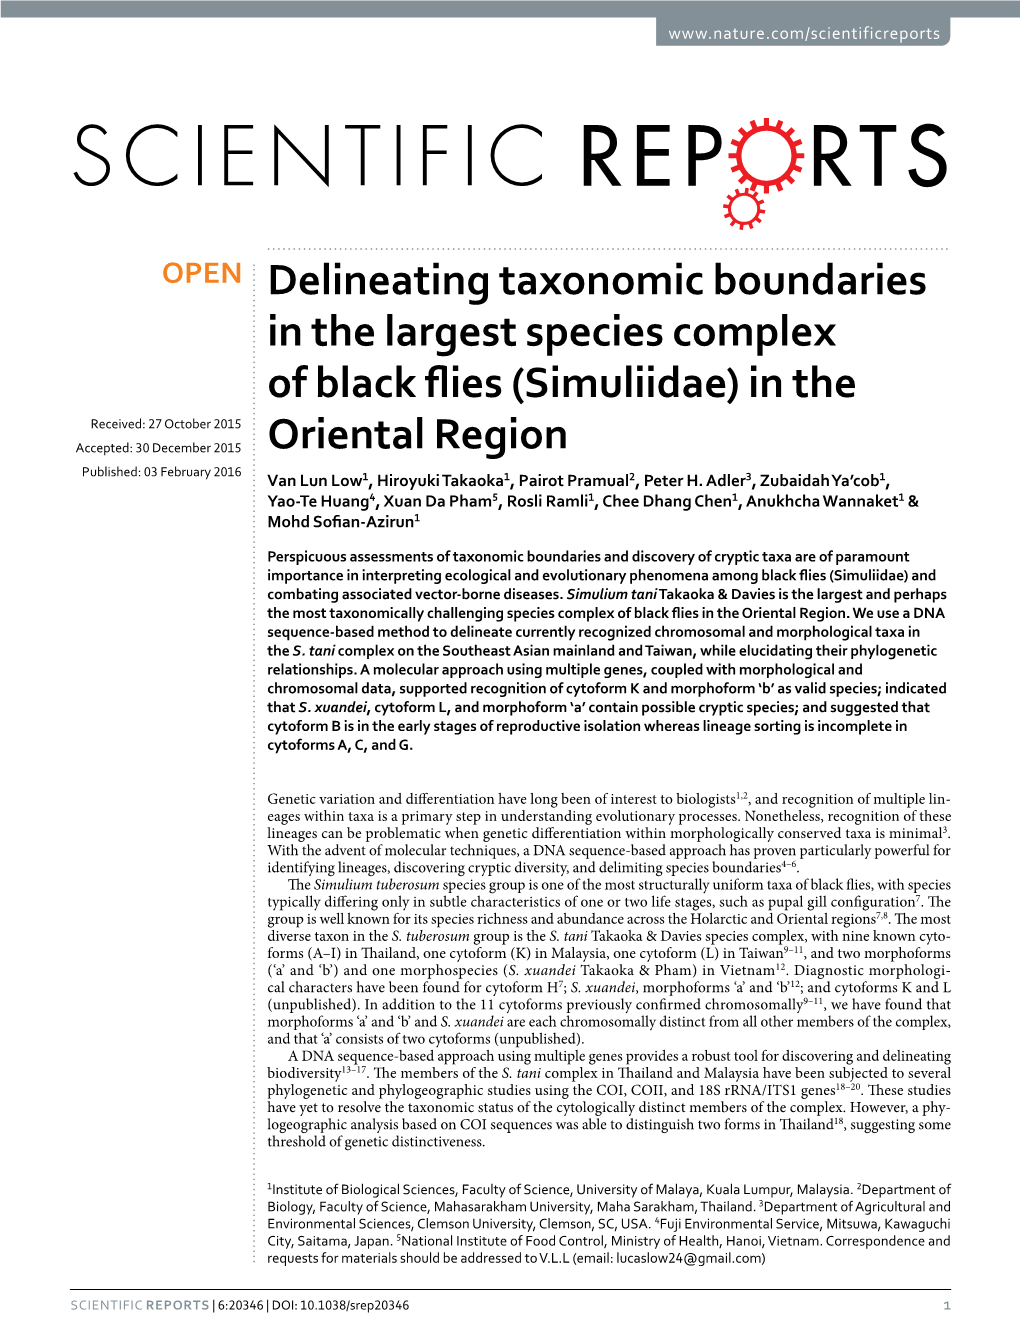 Delineating Taxonomic Boundaries in the Largest Species Complex Of